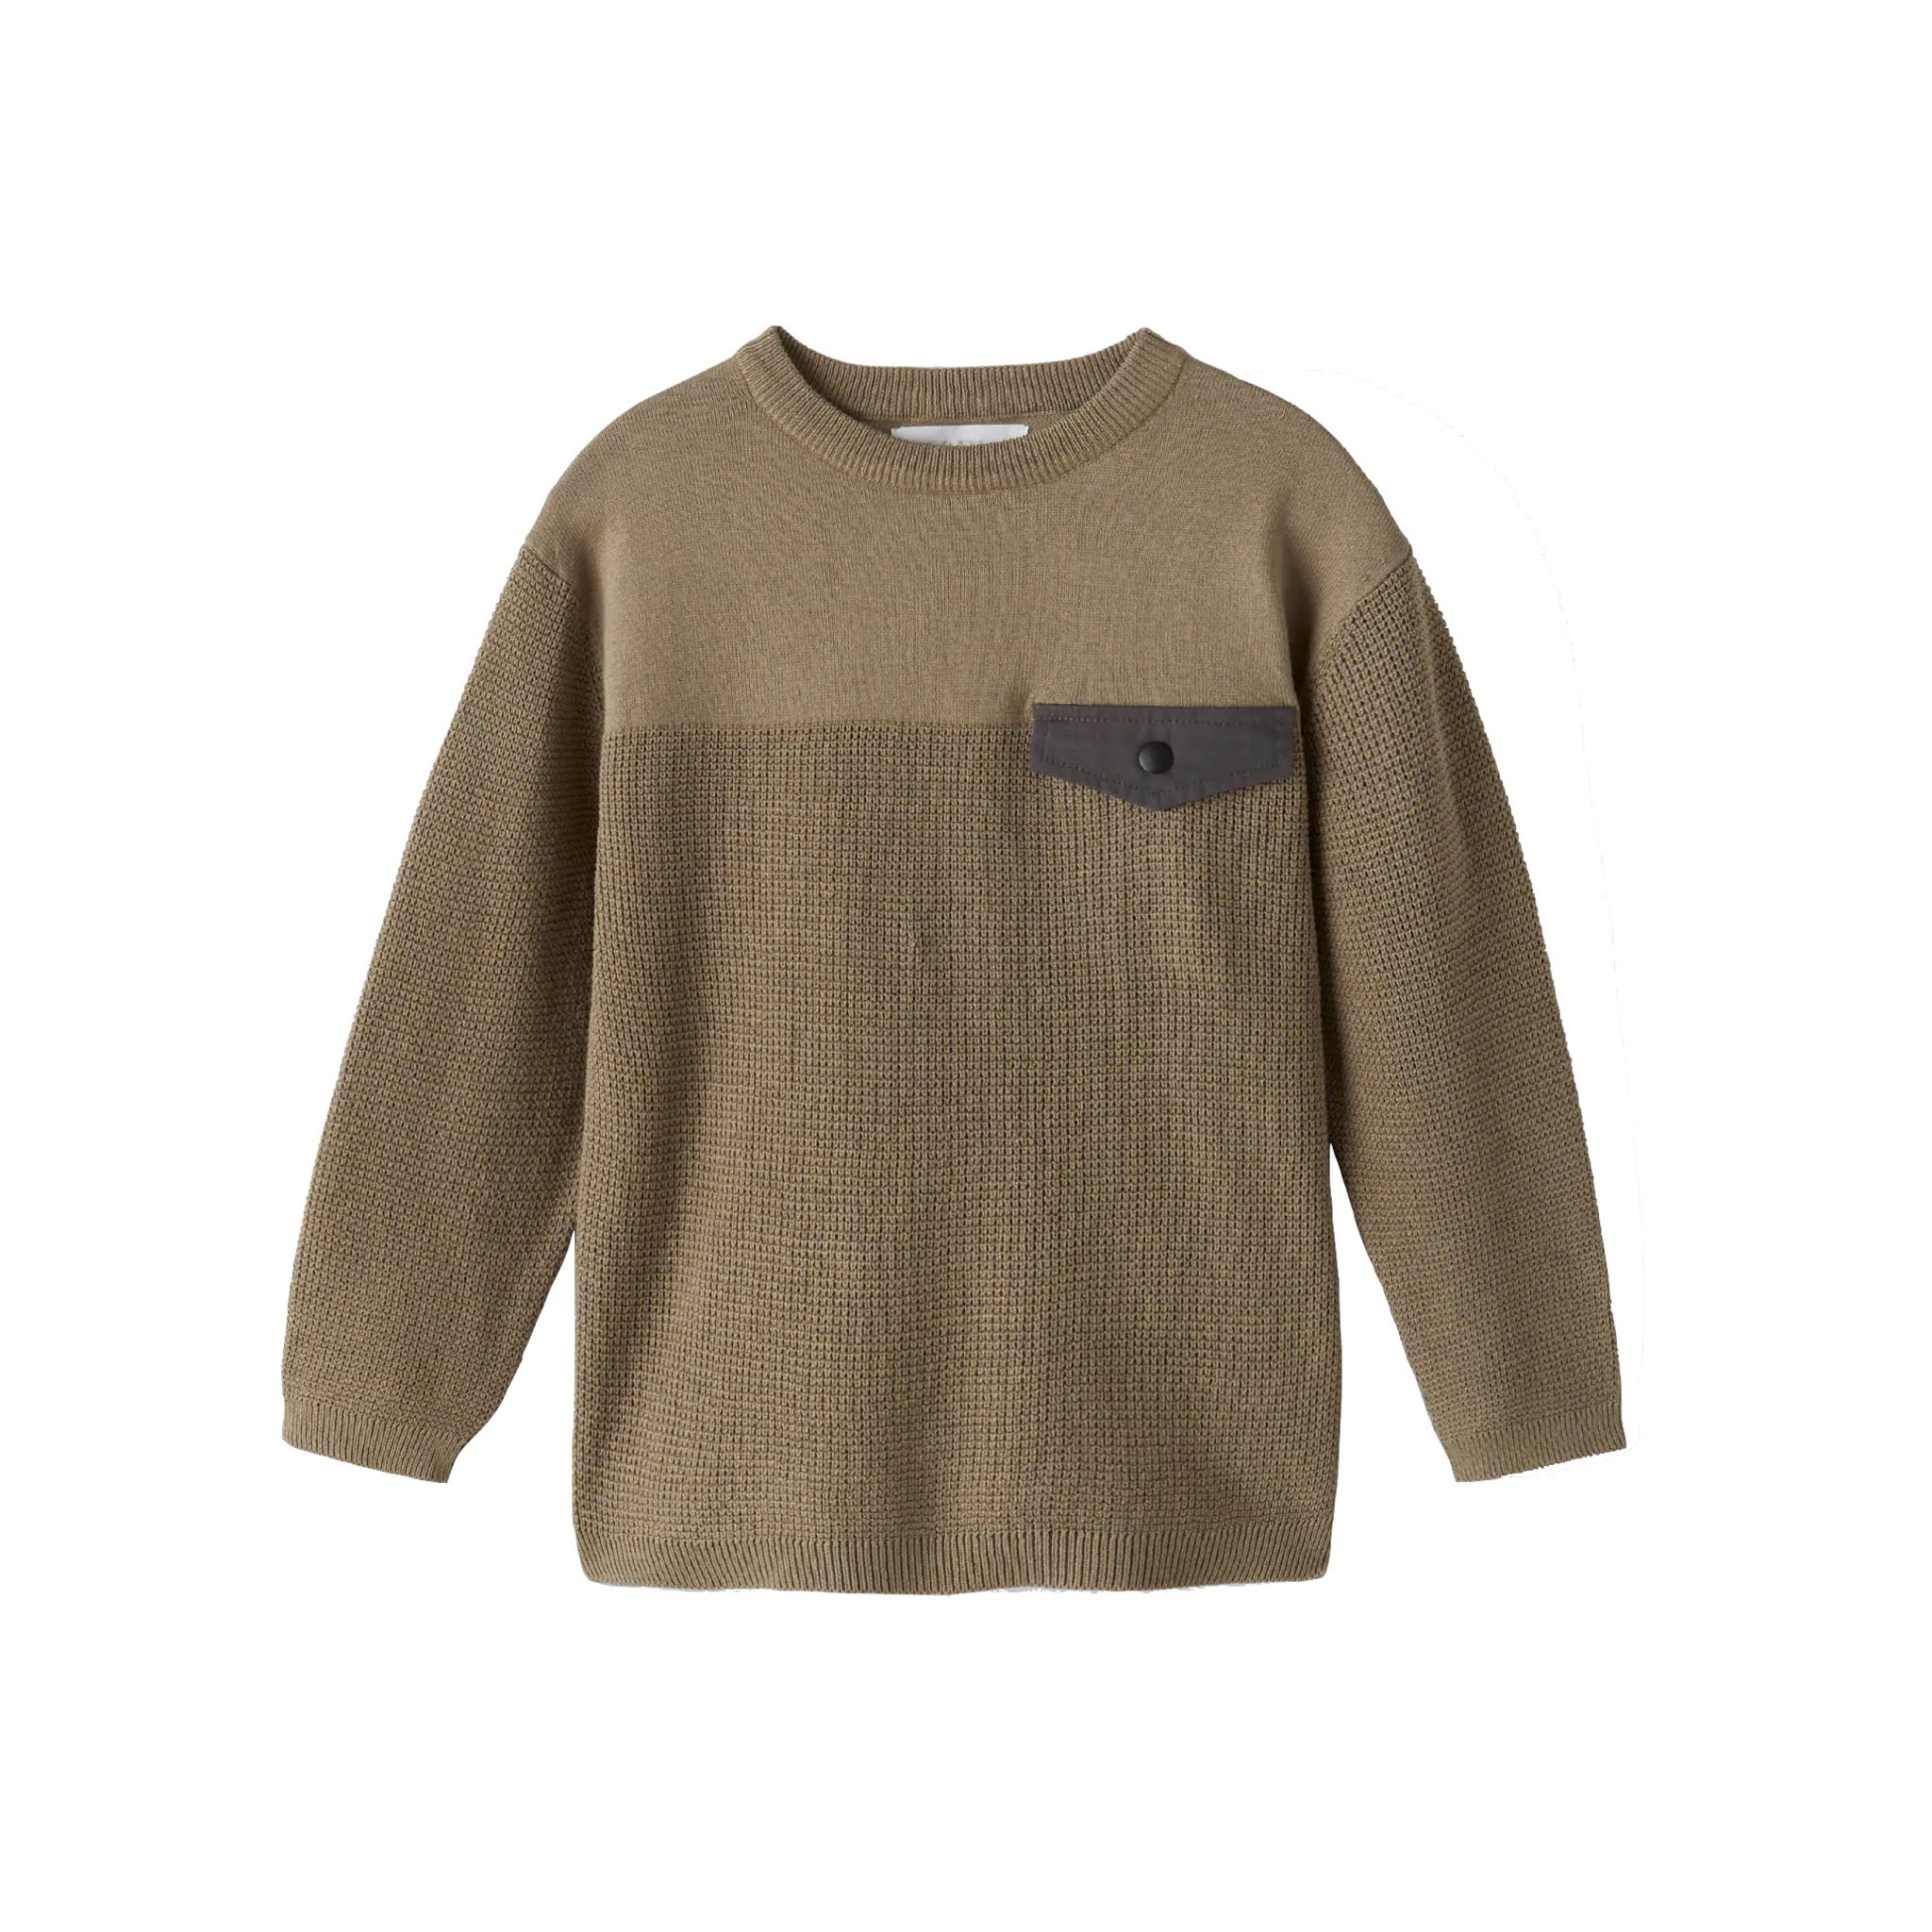 Boys Taupe Brown Knit Sweater from Zara Kids